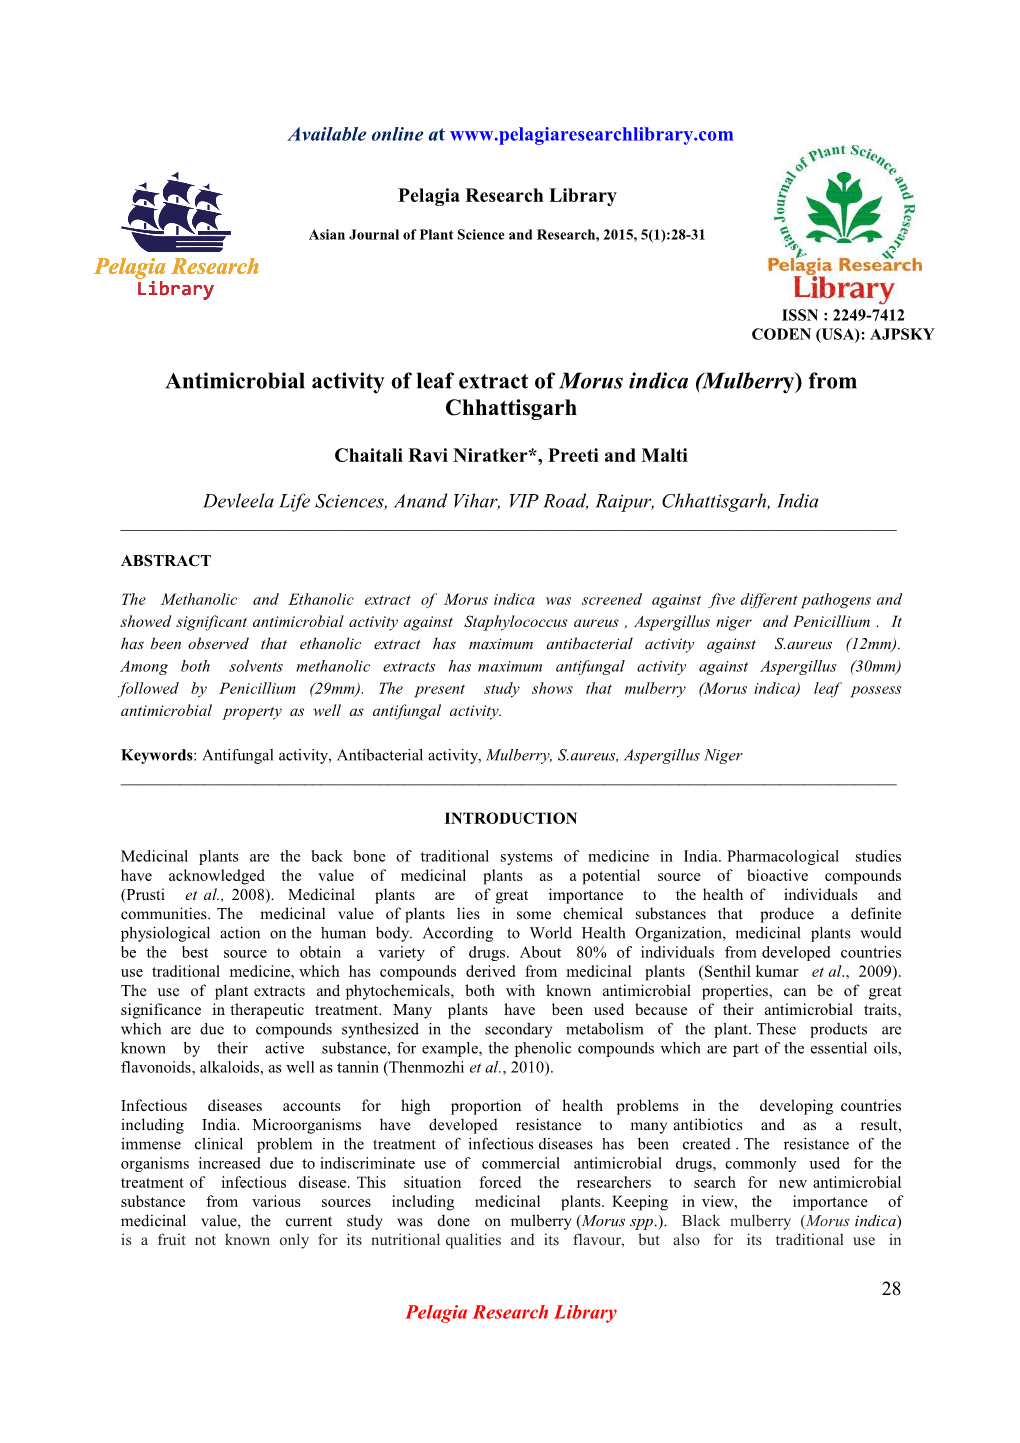 Antimicrobial Activity of Leaf Extract of Morus Indica (Mulberry) From